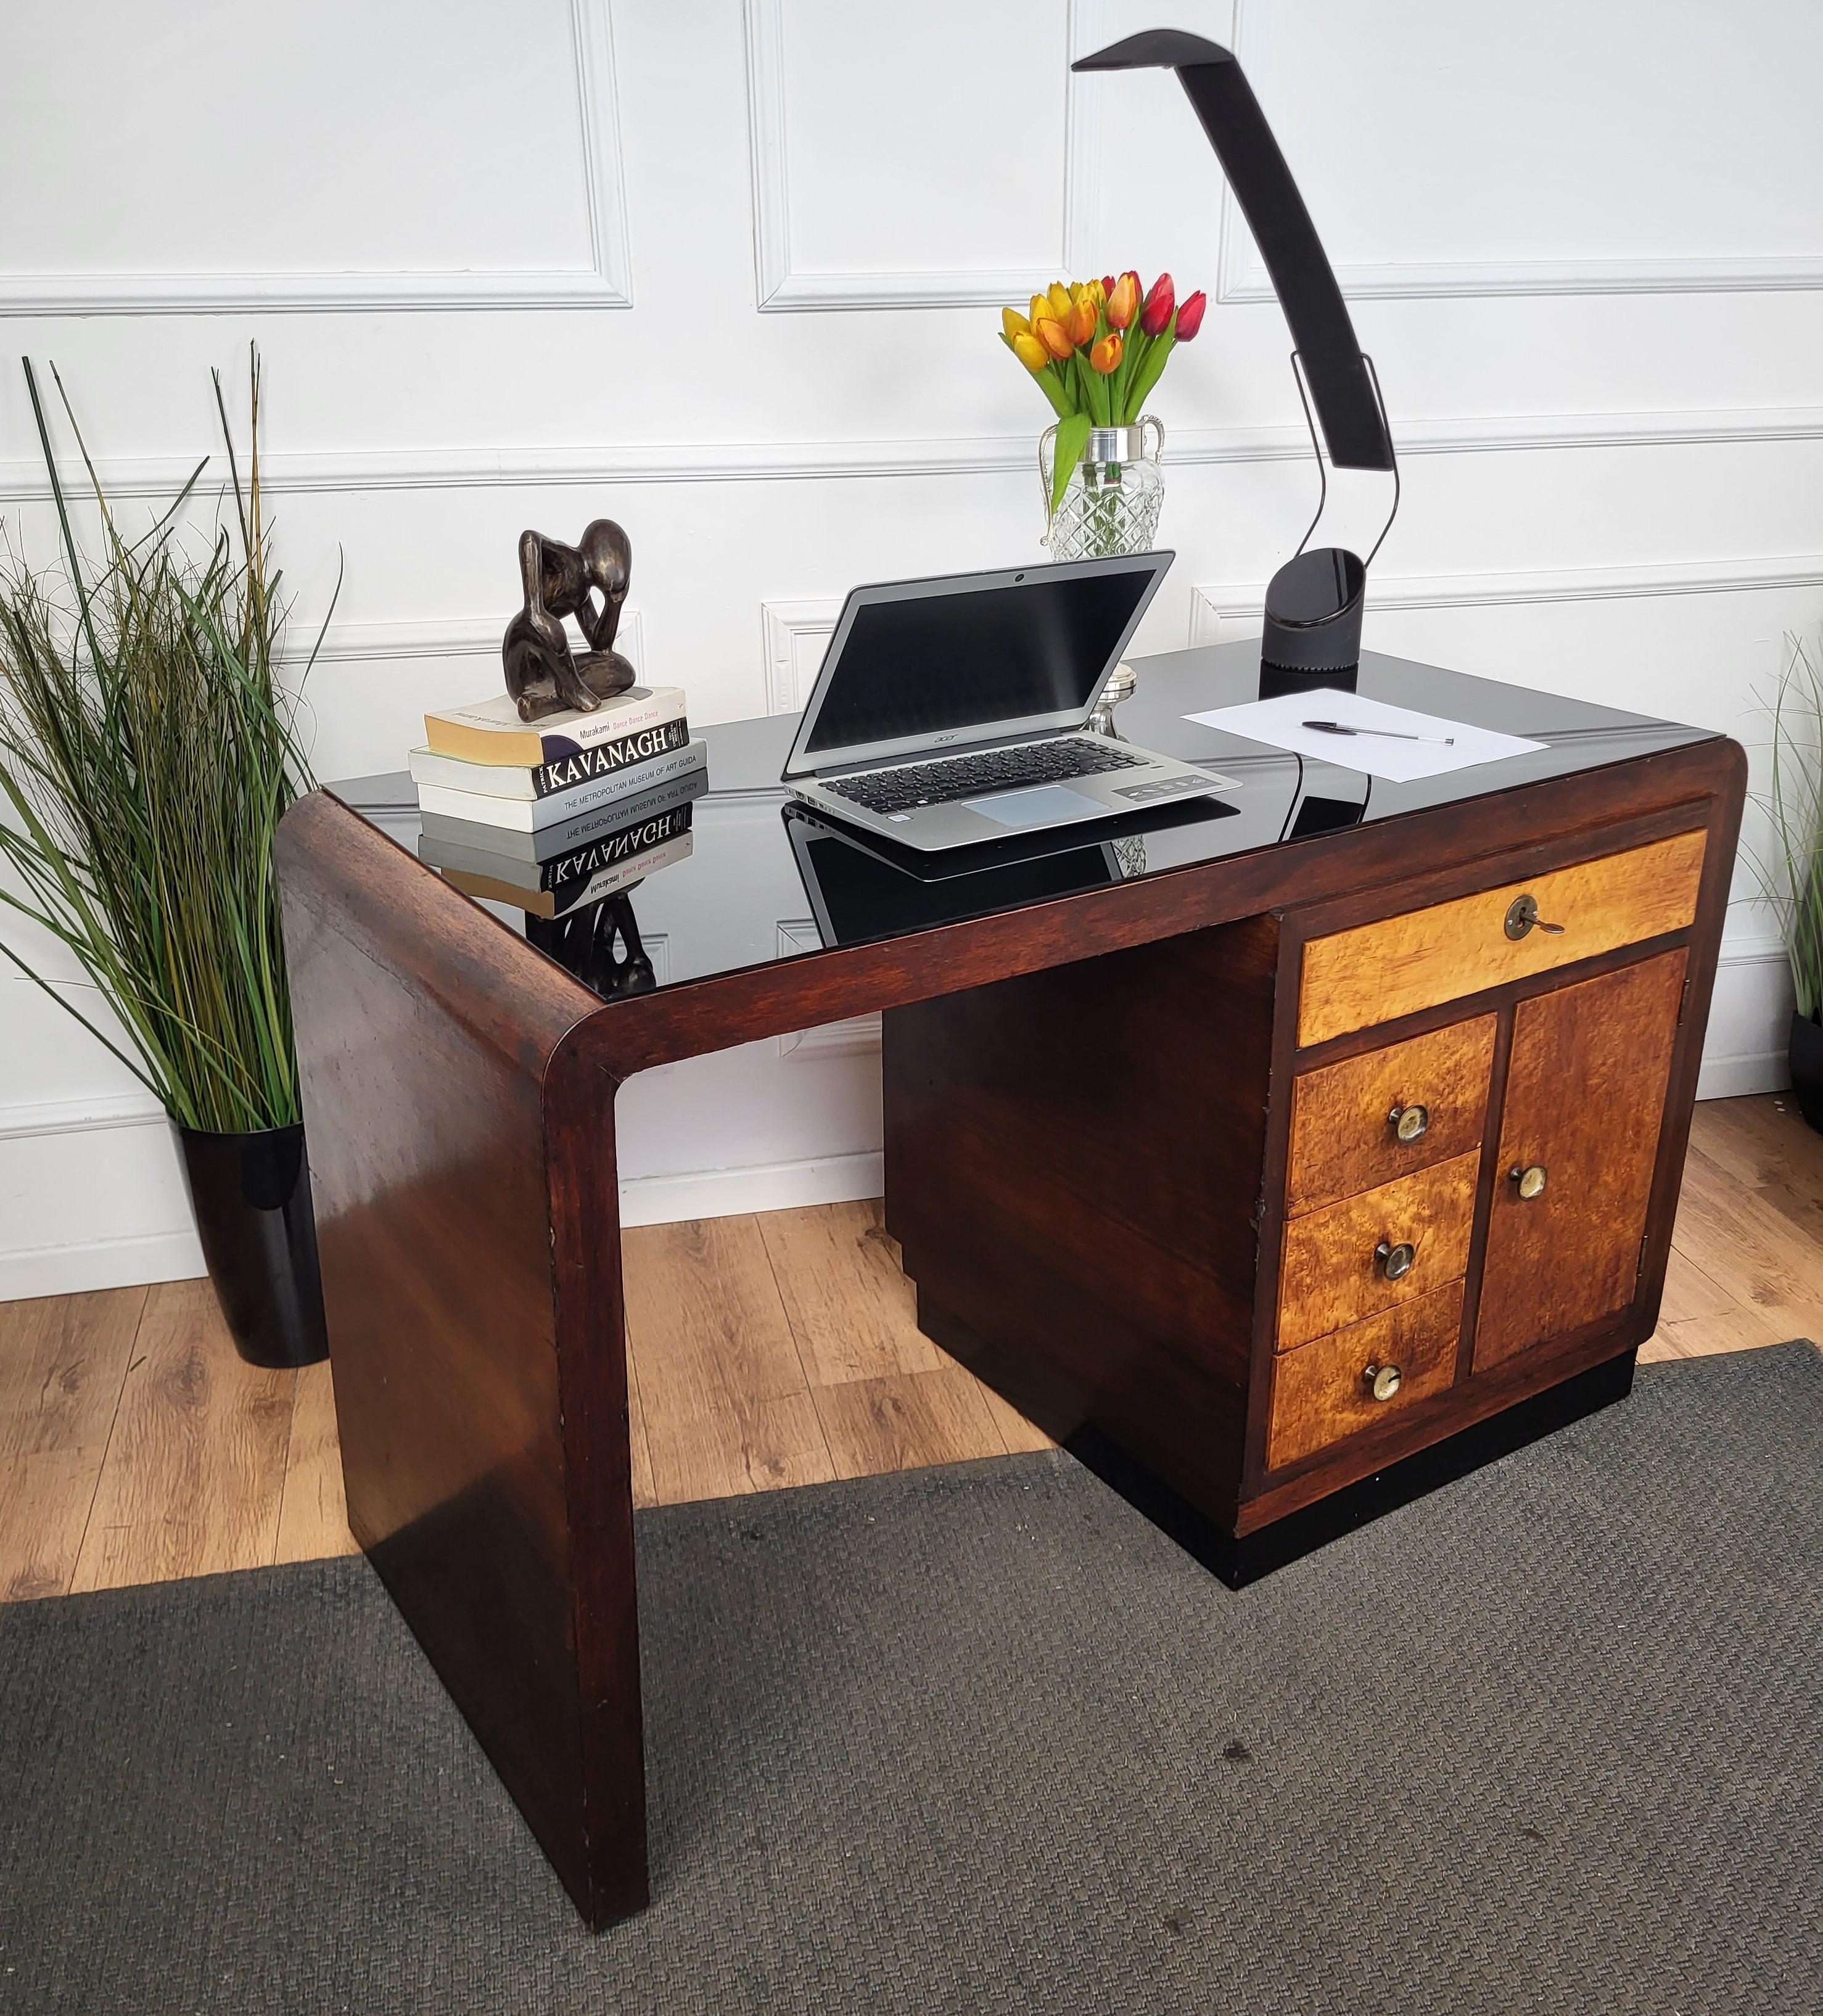 Beautiful Italian Art Deco Mid-Century Modern desk writing table, in veneer burl wood and precious black opaline glass top, with elegant carved frame and curved sides highlighted by the black details and completed by the side, back and front door